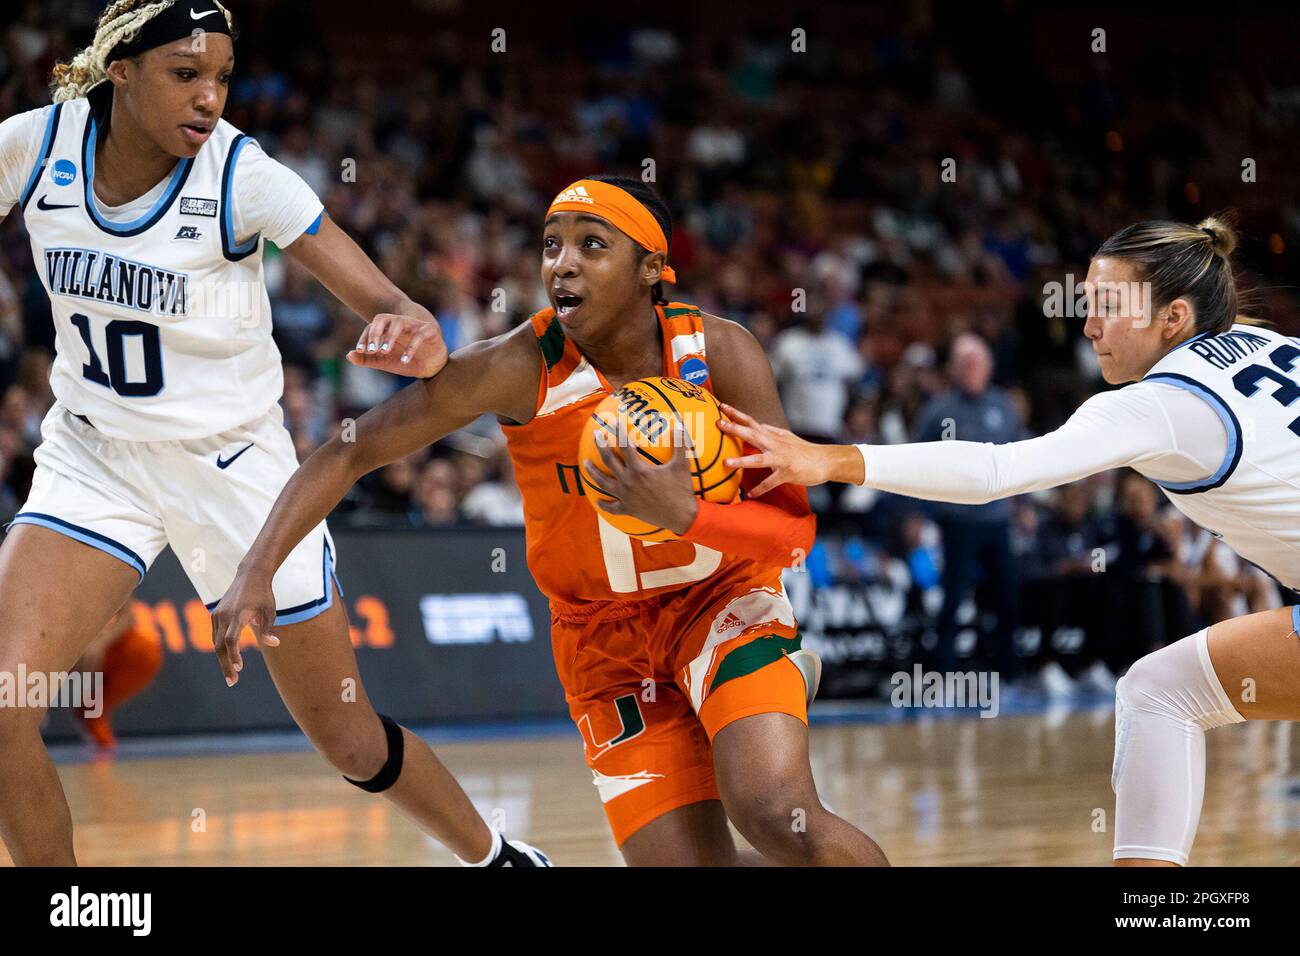 Miami's Lashae Dwyer (13) drives to the basket between Villanova's Christina  Dalce (10) and Bella Runyan (32) in the second half of a Sweet 16 college  basketball game at the NCAA Tournament